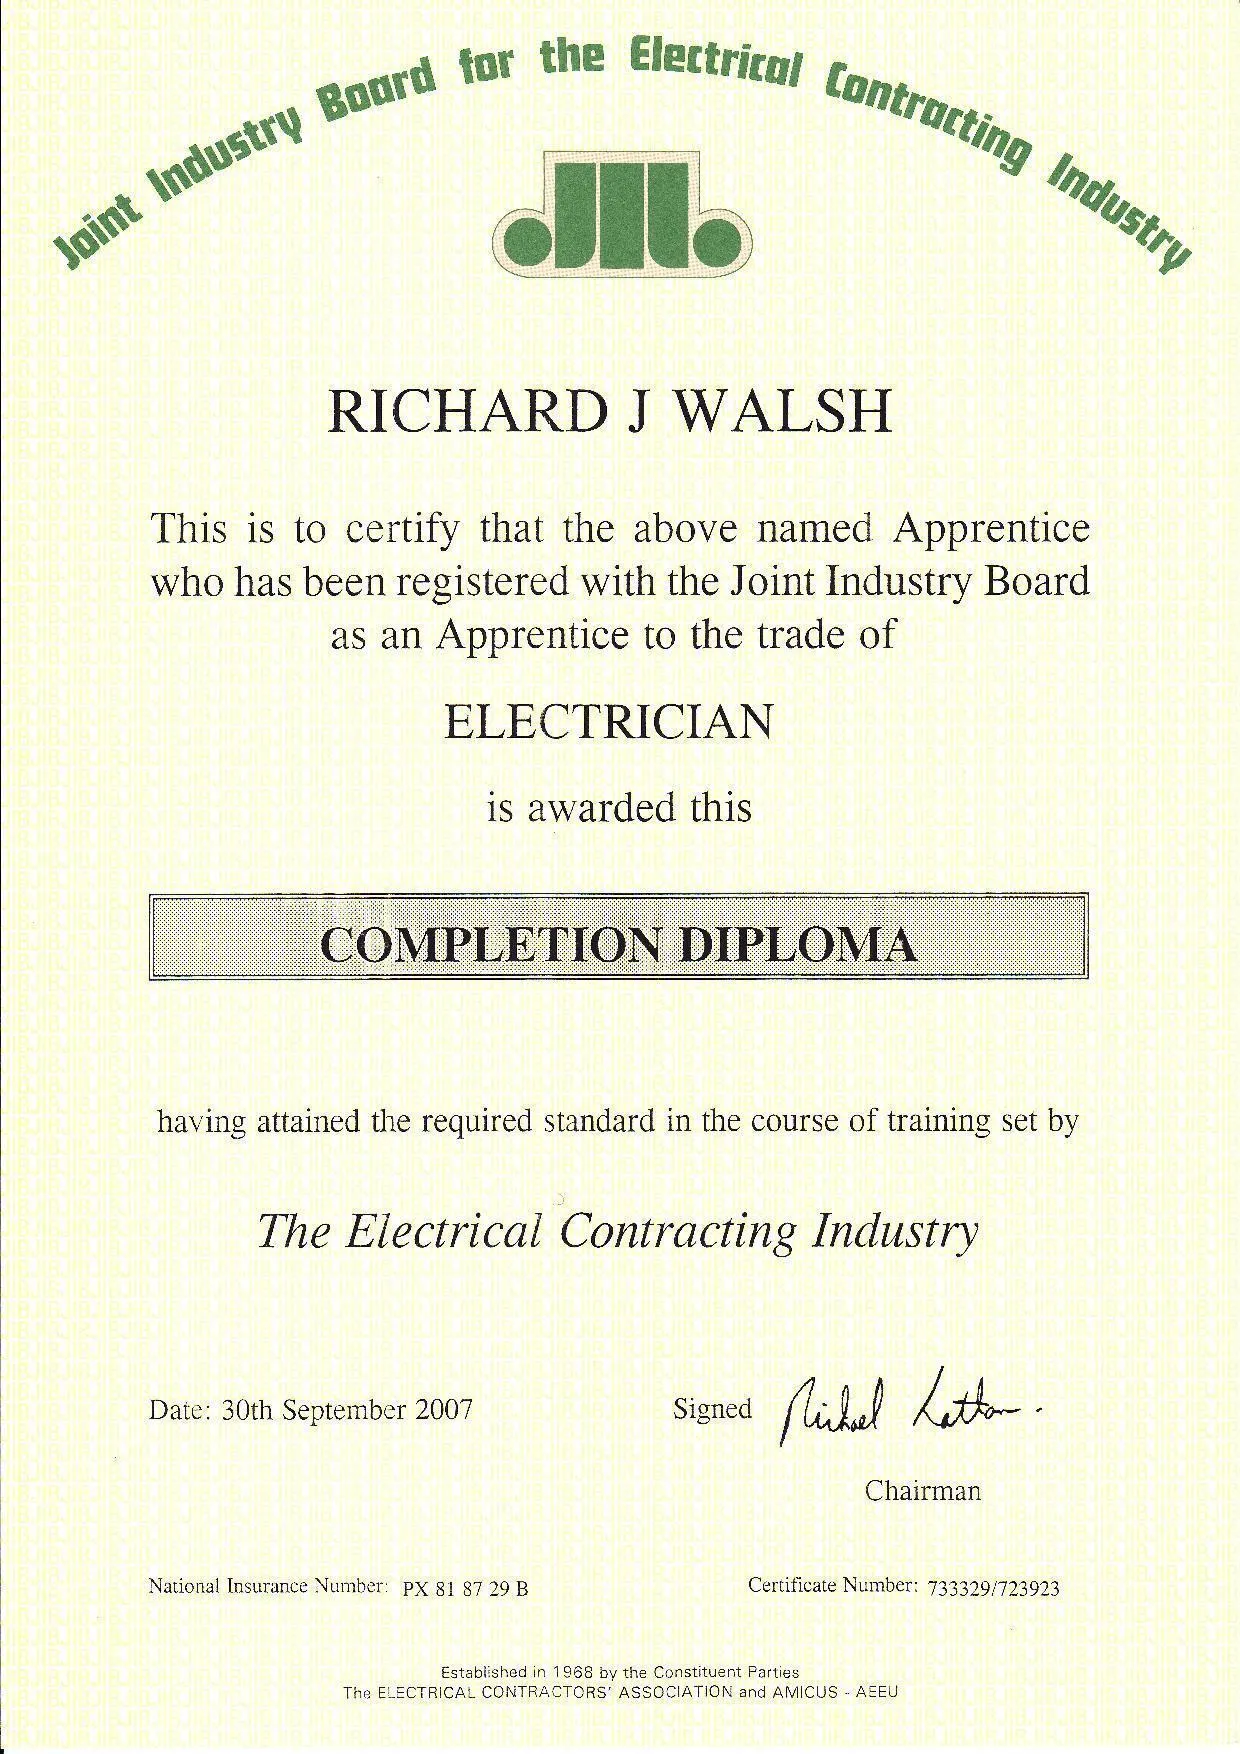 Qualified Registered Electrician in Derry Donegal Walsh